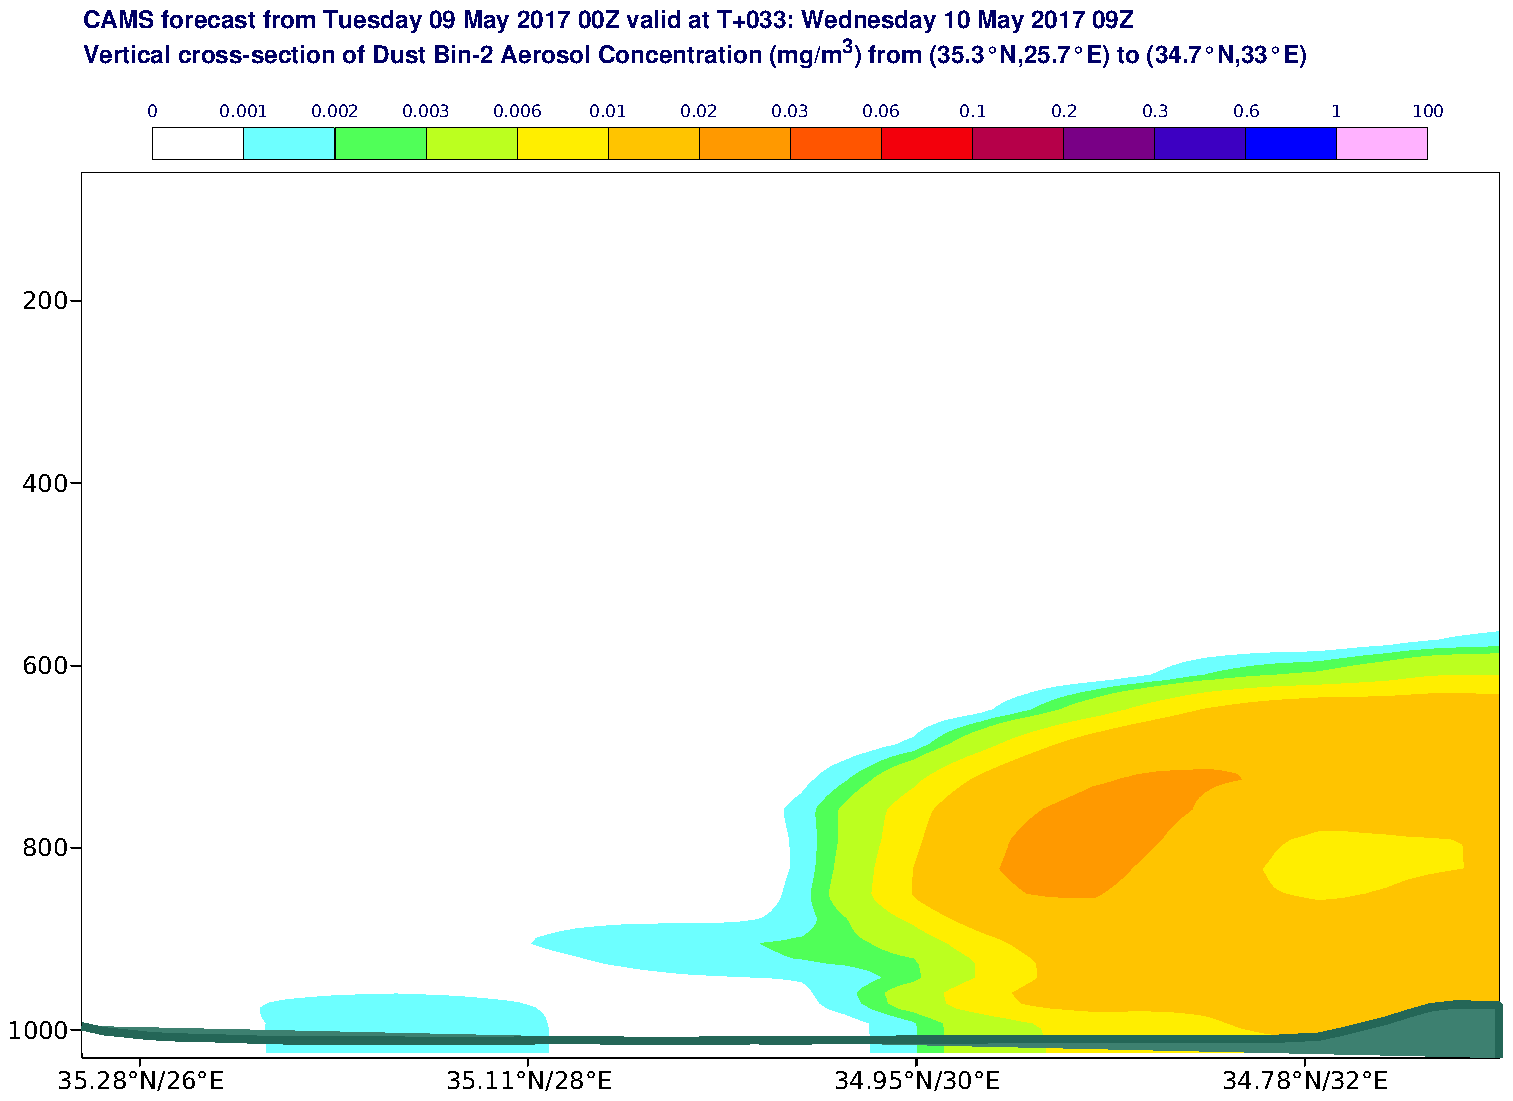 Vertical cross-section of Dust Bin-2 Aerosol Concentration (mg/m3) valid at T33 - 2017-05-10 09:00